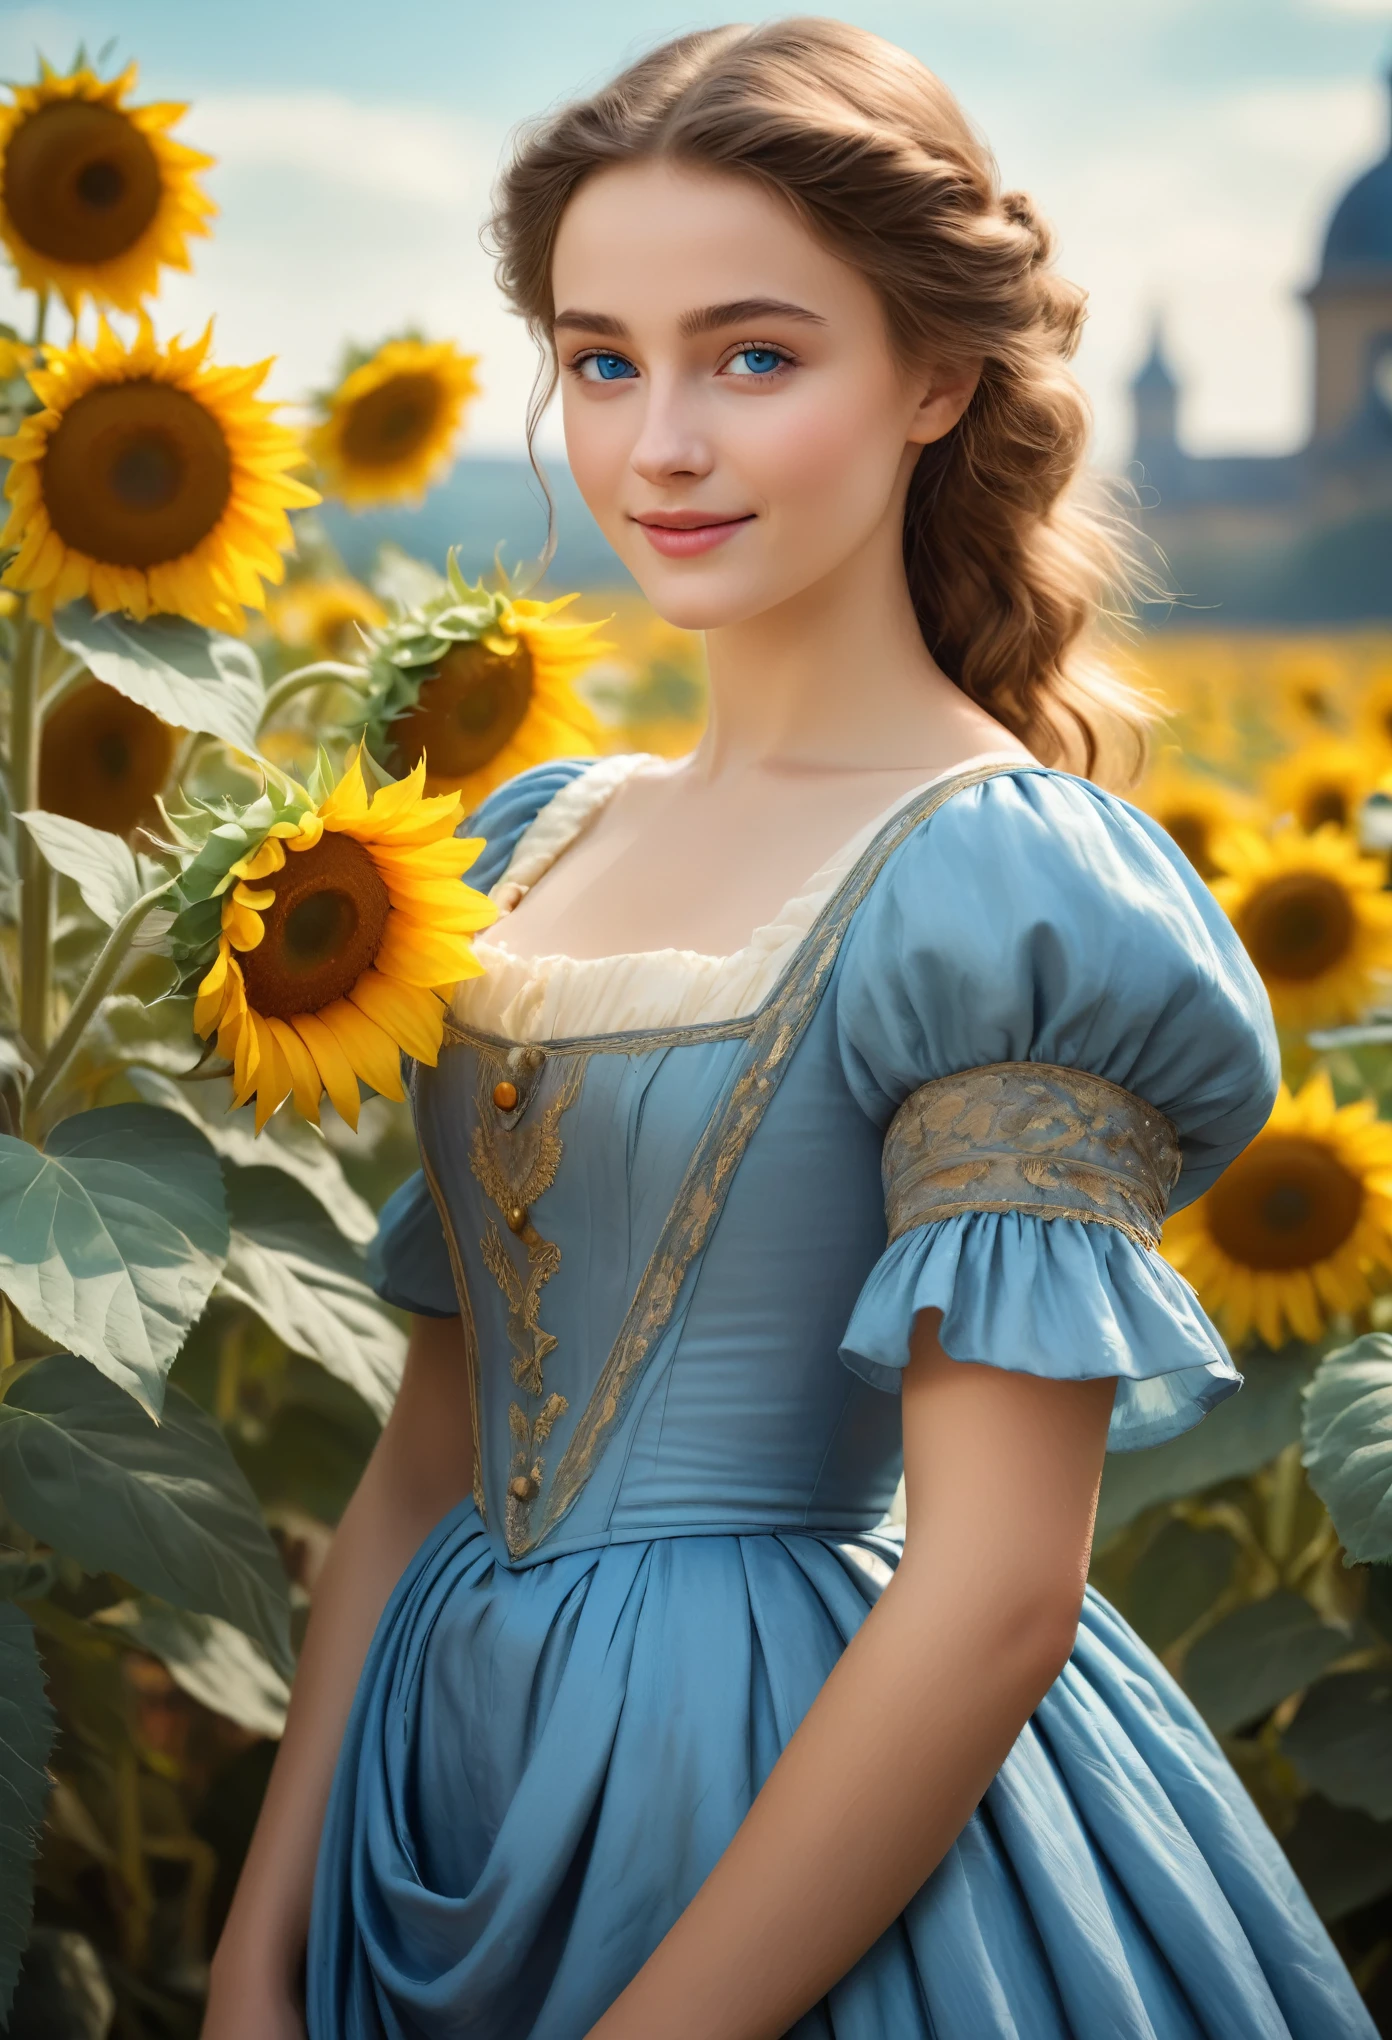 (best quality,highres,masterpiece:1.2),ultra-detailed,(realistic,photorealistic,photo-realistic:1.37), A French girl,19th century,16 years old, merchant's daughter, (dreamy blue eyes:1.5), high nose, holding a bunch of sunflowers, detailed facial features elegant posture, vintage clothing, flowing silk dress, the Mars background, soft sunlight, subtle bokeh, vivid colors, impressionist style, detailed brushstrokes, classical composition, graceful expression, Waist up, dynamic angle, White skin, Surrealism, Dreamy atmosphere, smiling